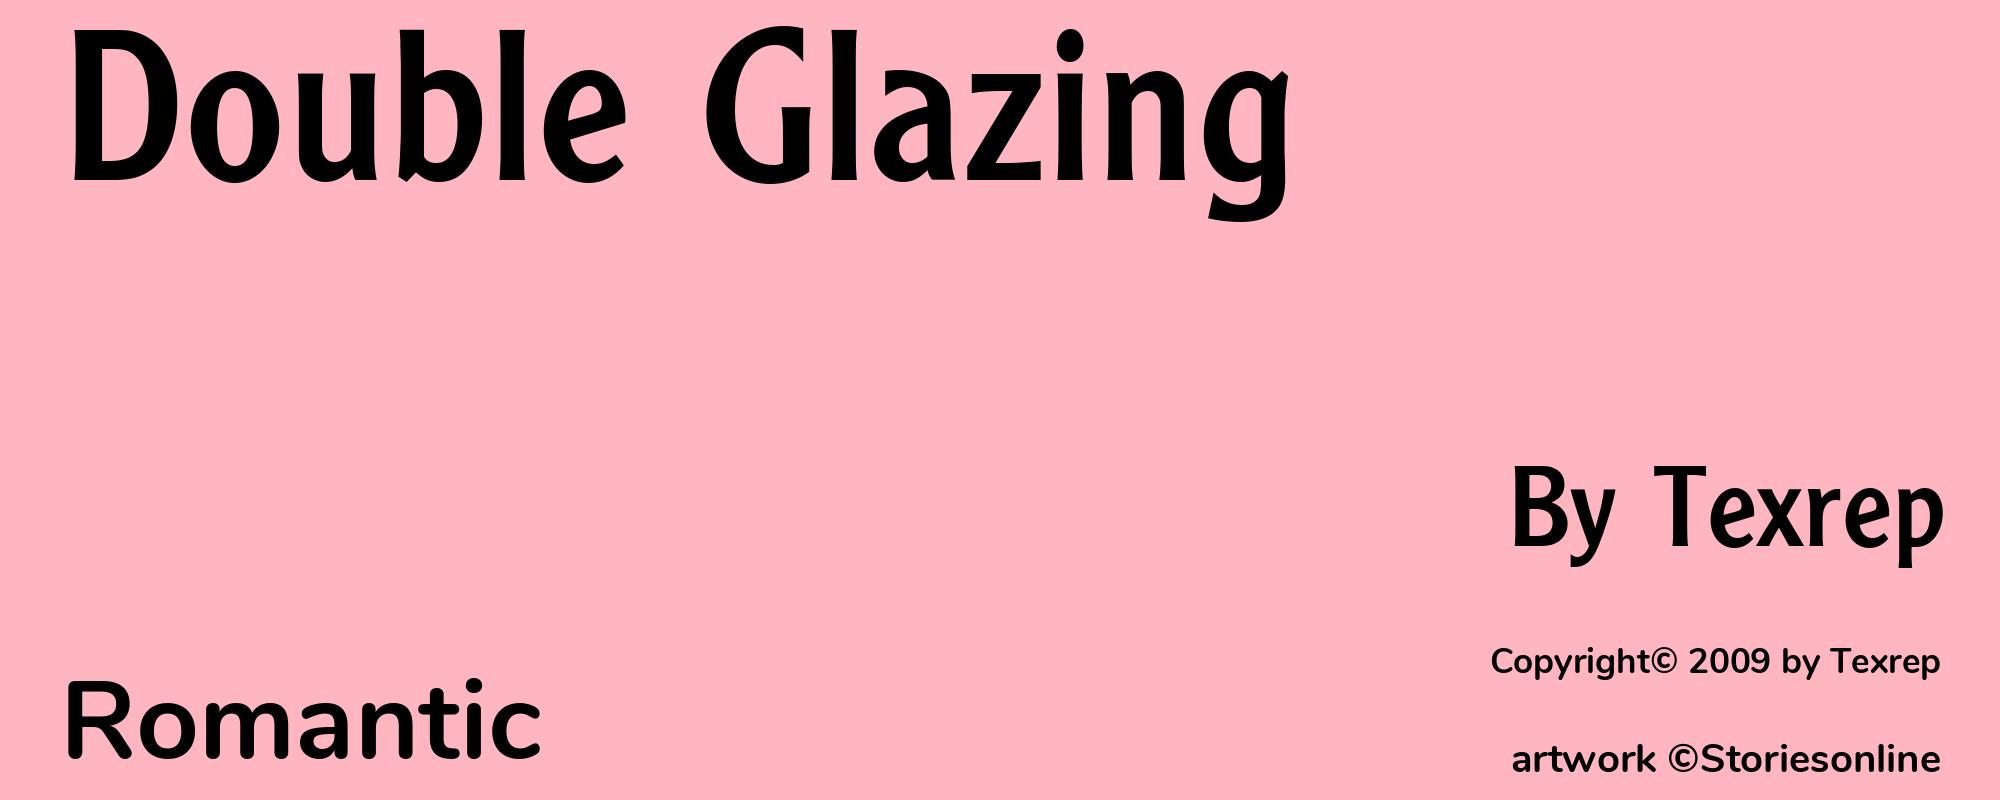 Double Glazing - Cover